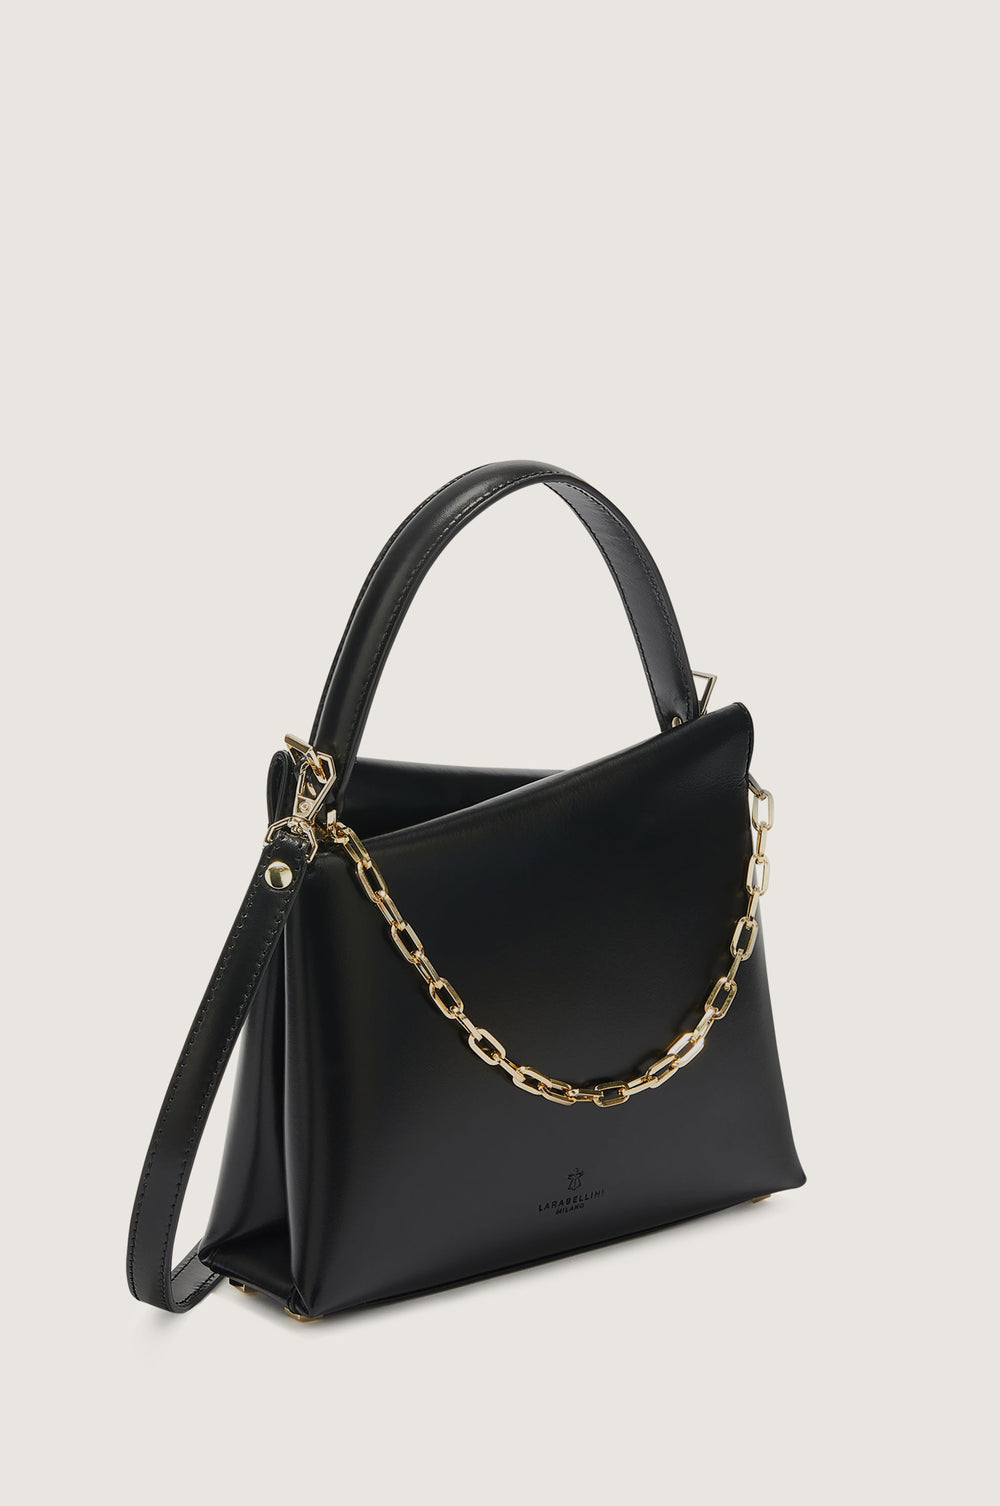 Elegant black leather handbag with gold chain strap and top handle